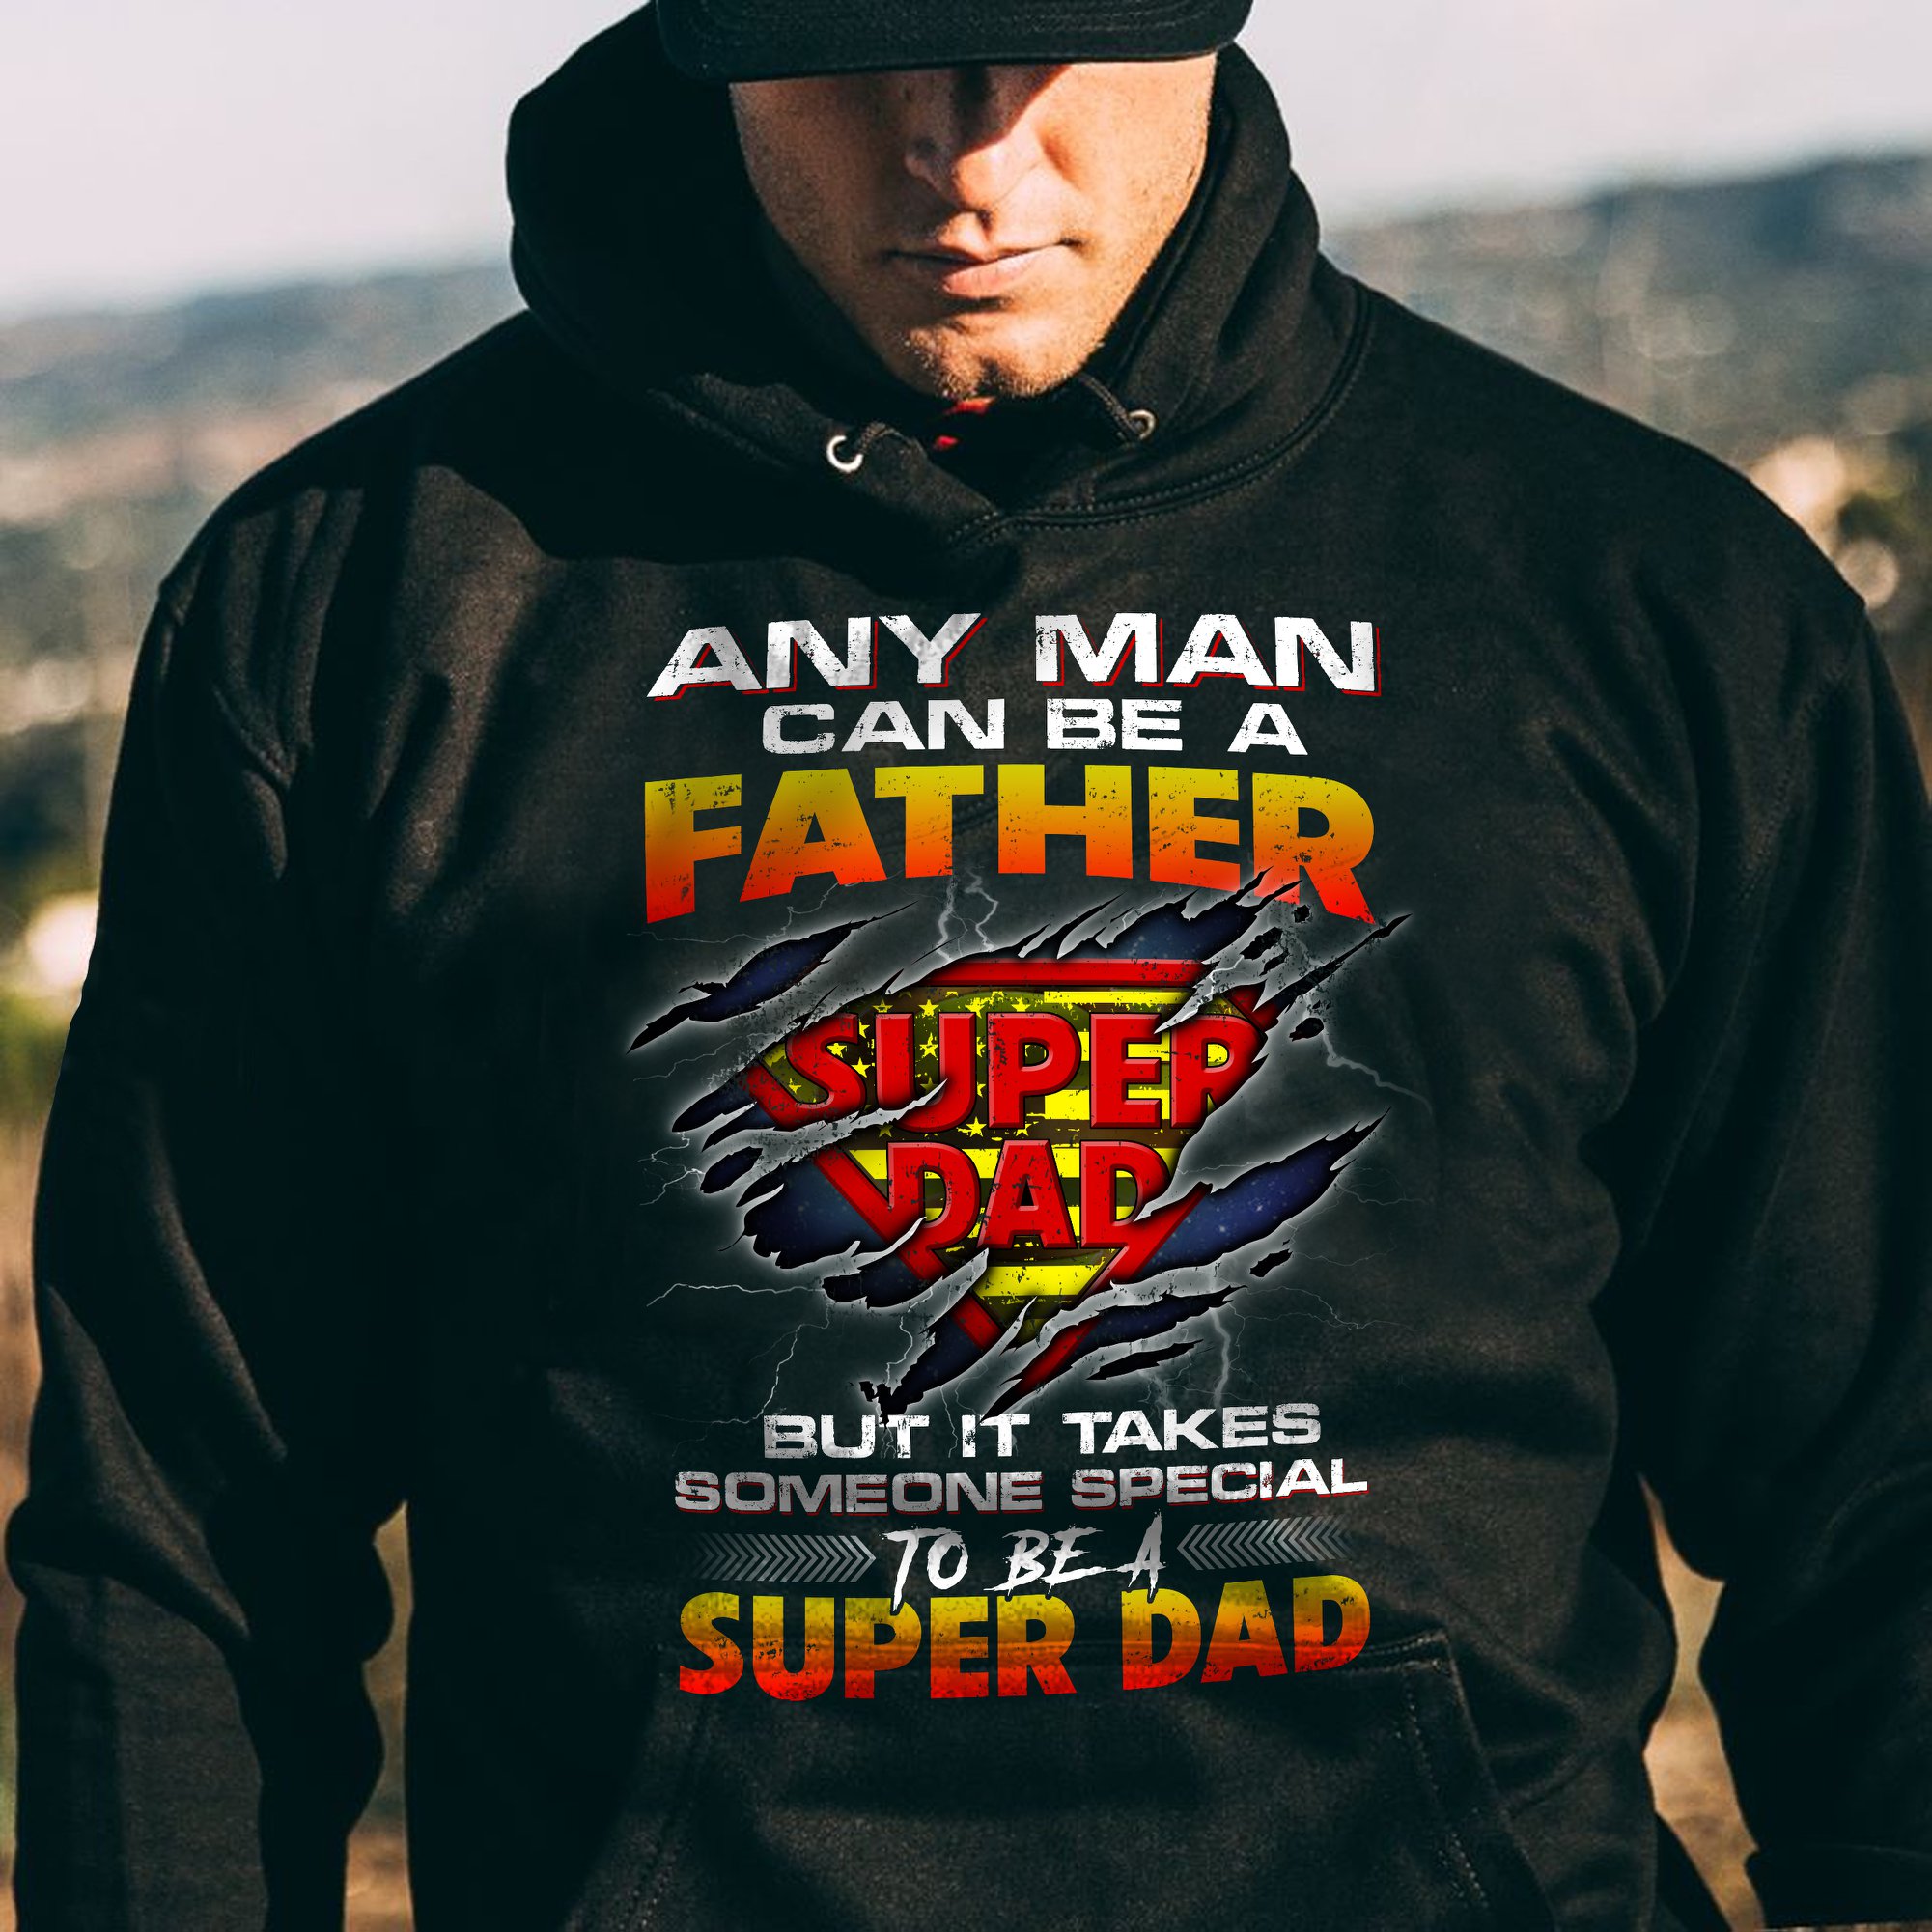 Any man be a father but it takes someone special to be a super dad